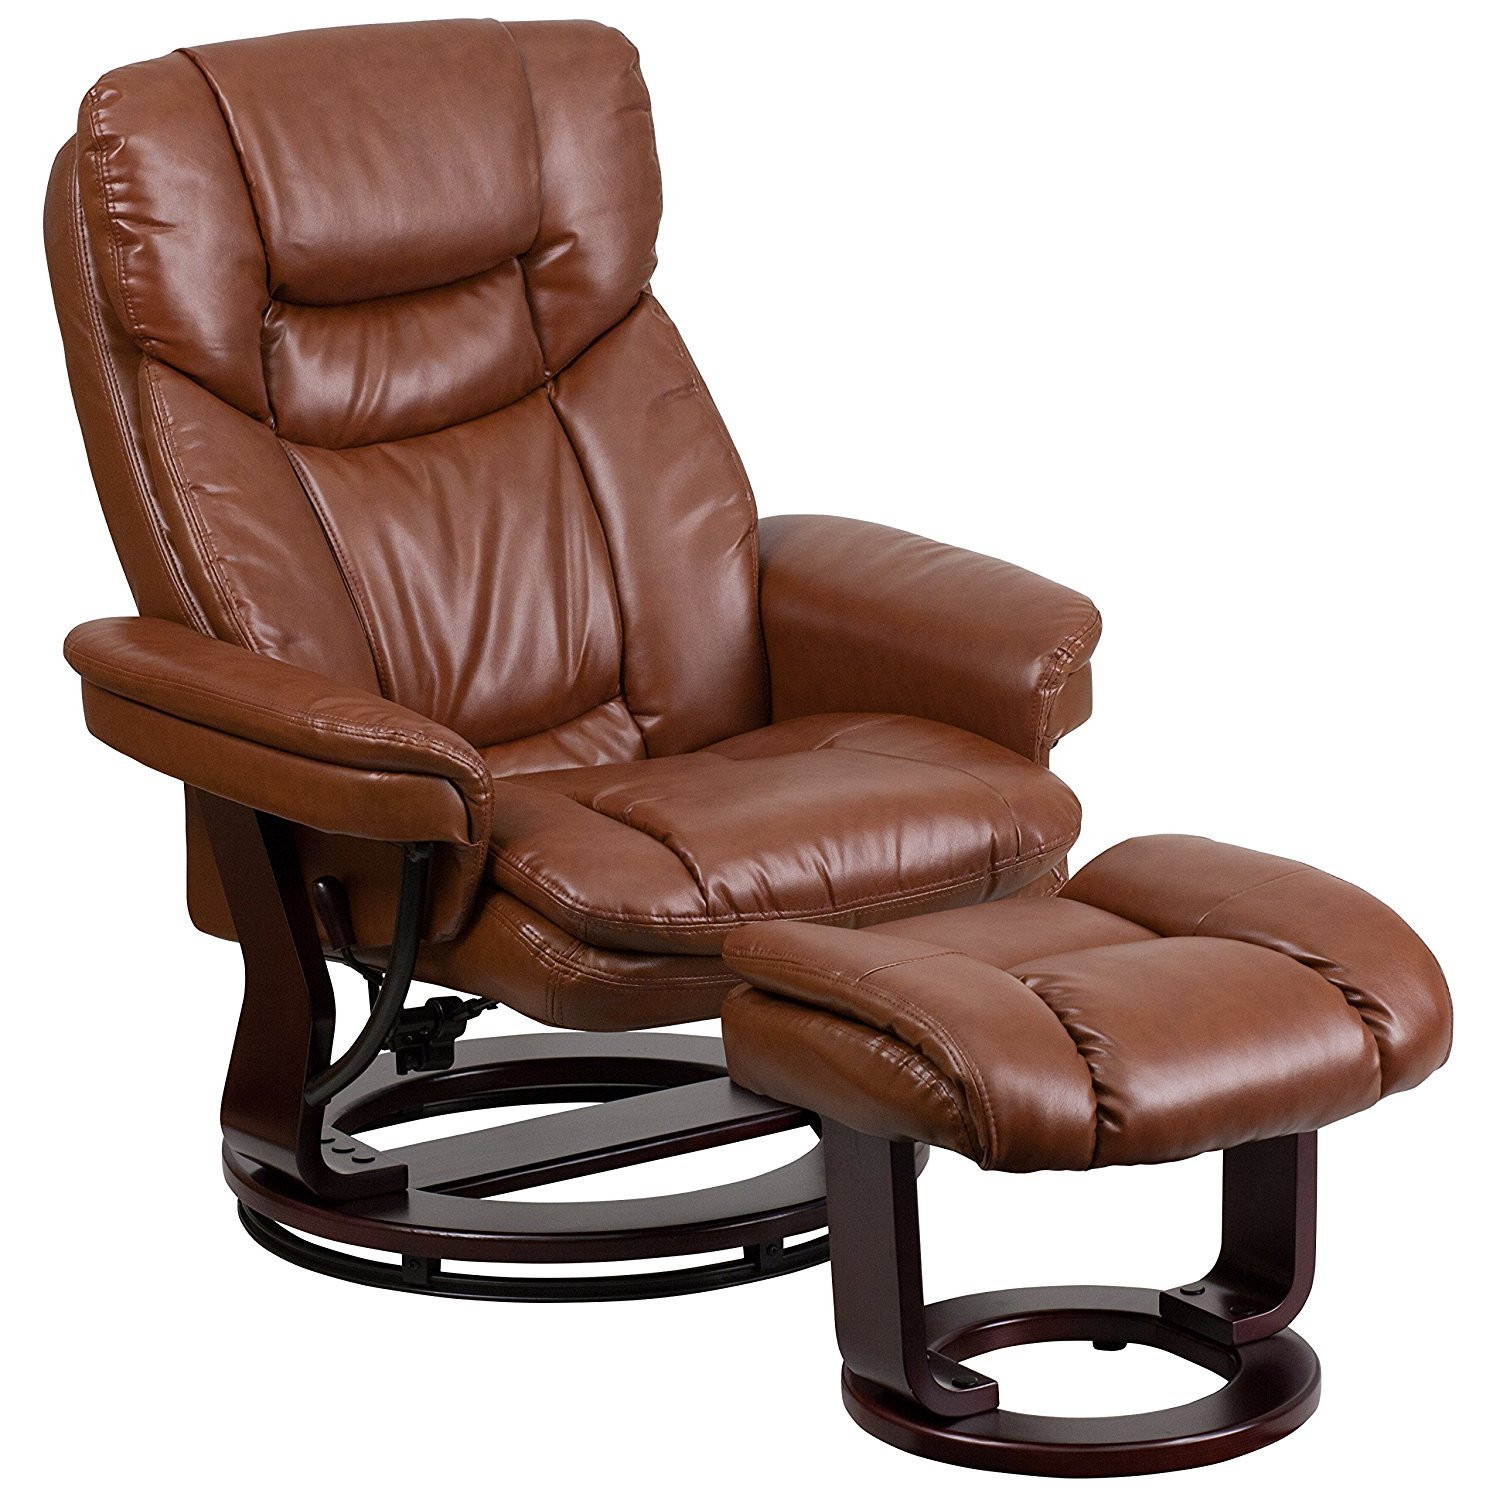 Swivel Chair Living Room
 Leather Swivel Chairs For Living Room Home Furniture Design